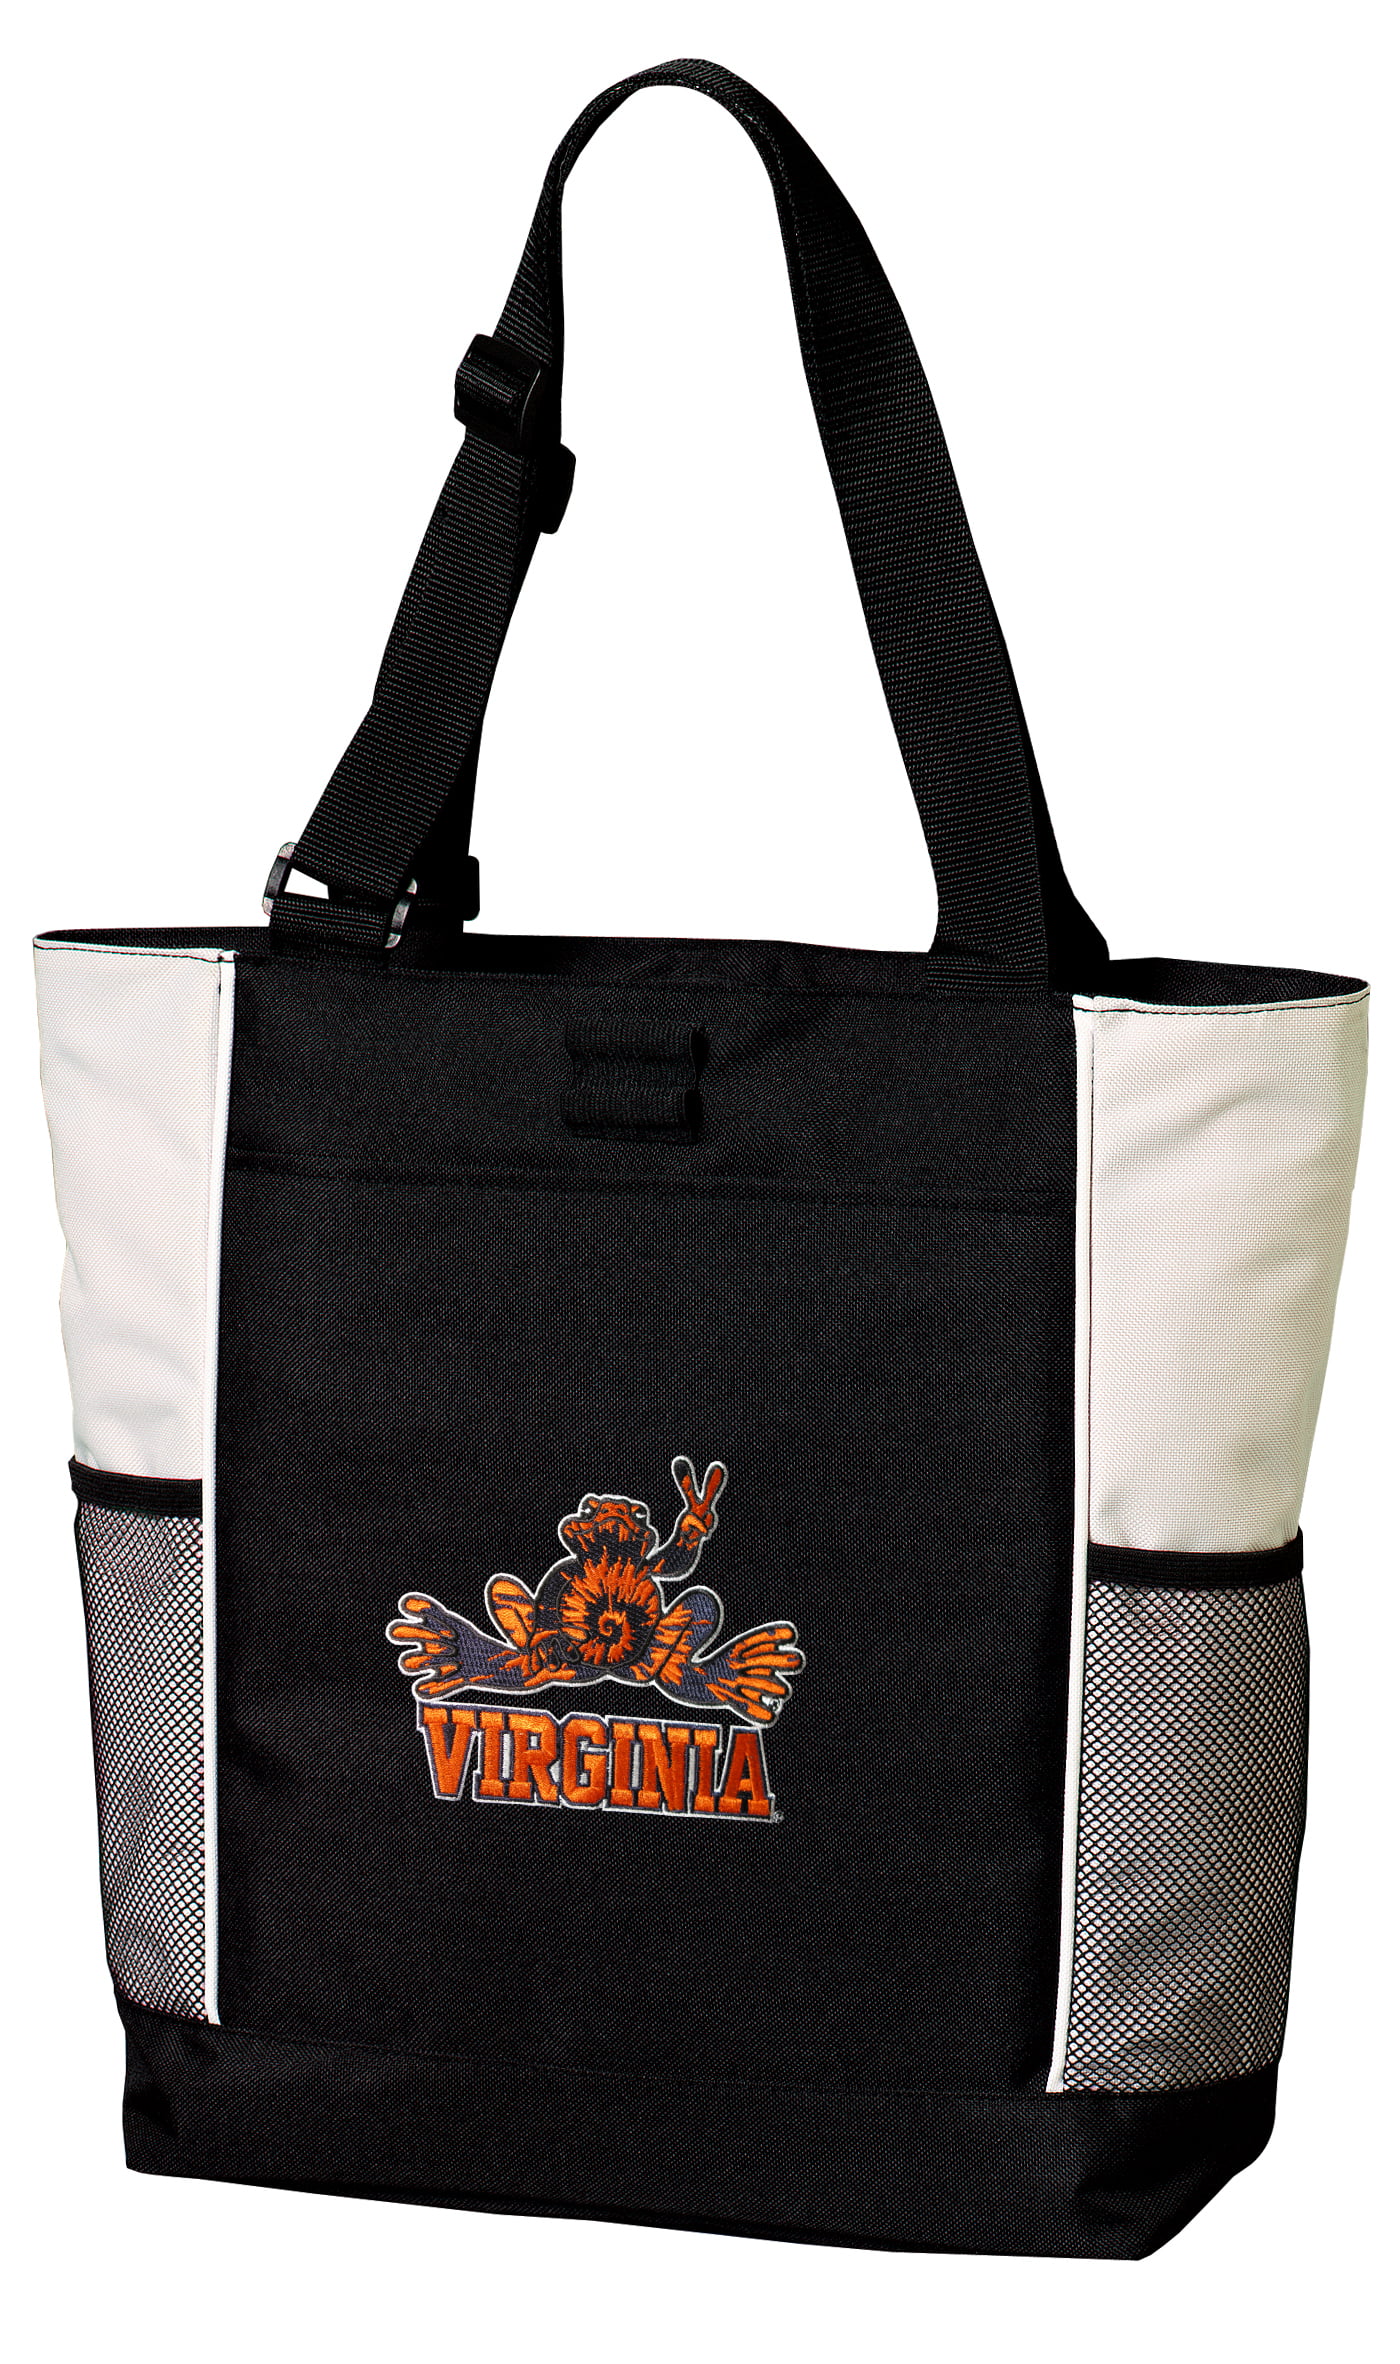 University of Arizona LARGE Tote Bag Wildcats Shopper Grocery Bags Beach Totes 